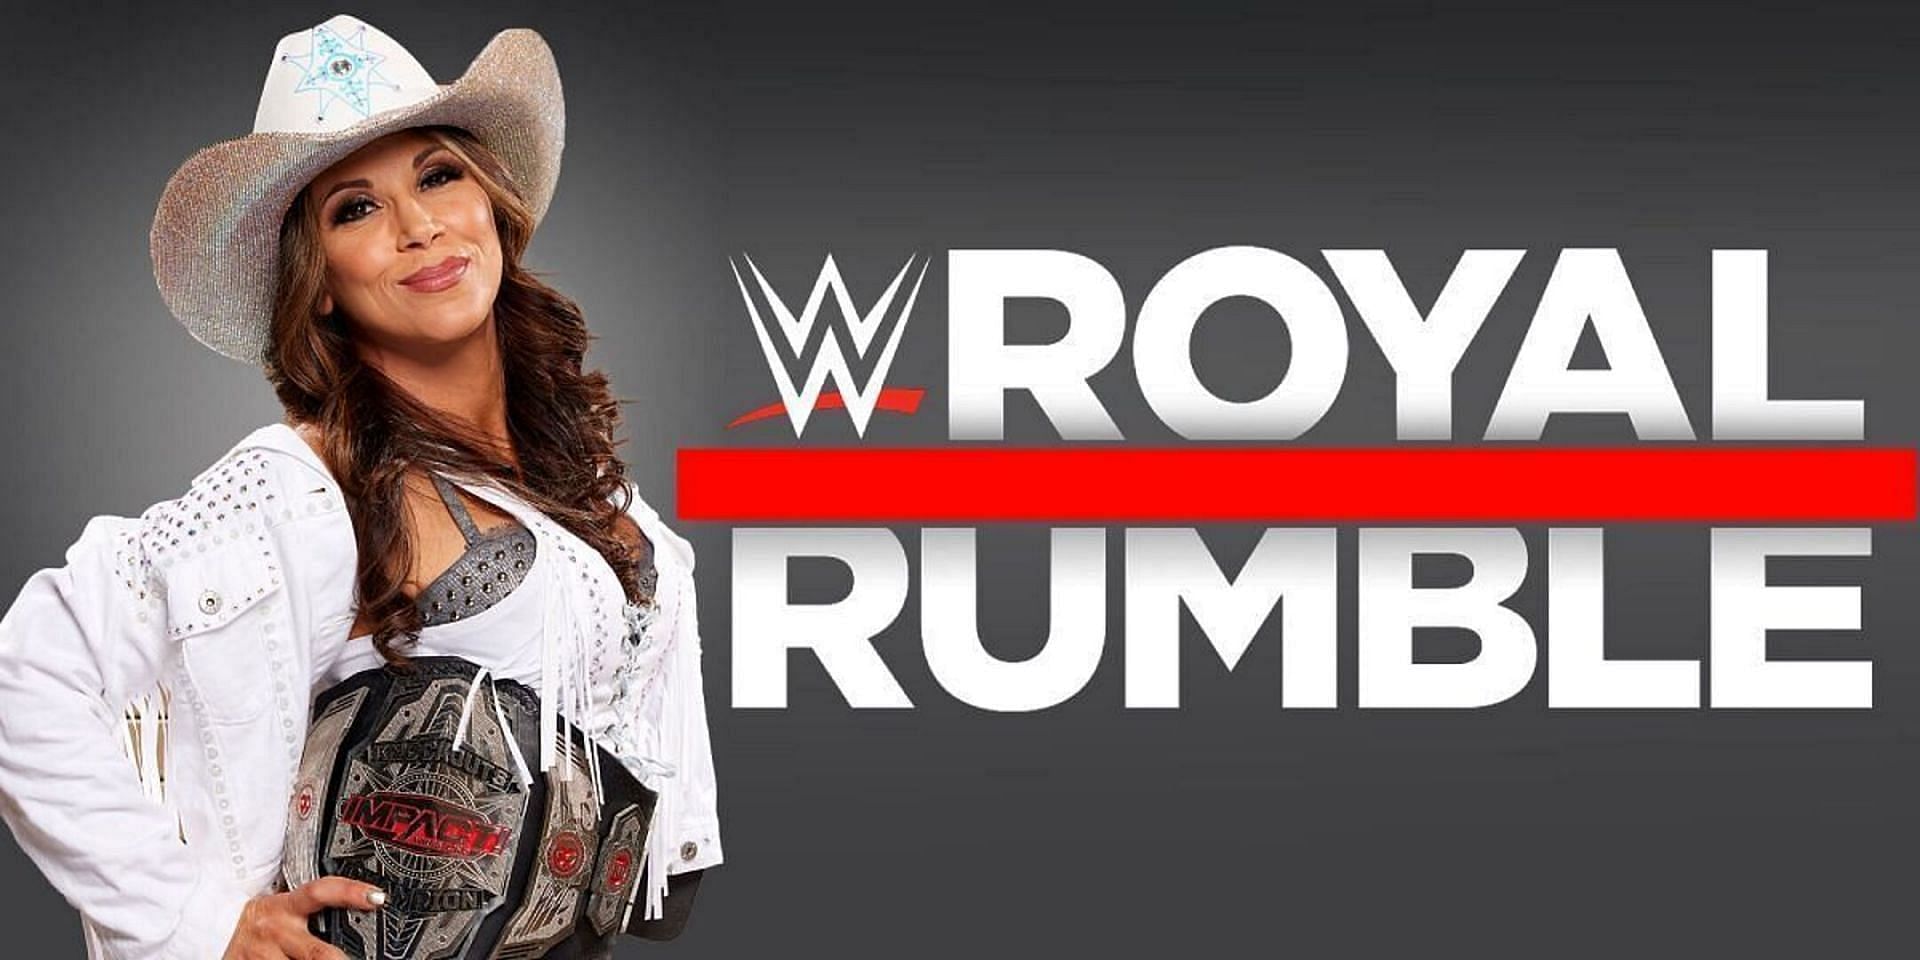 Mickie James could be seen with the Impact Knockouts Championship at the Royal Rumble